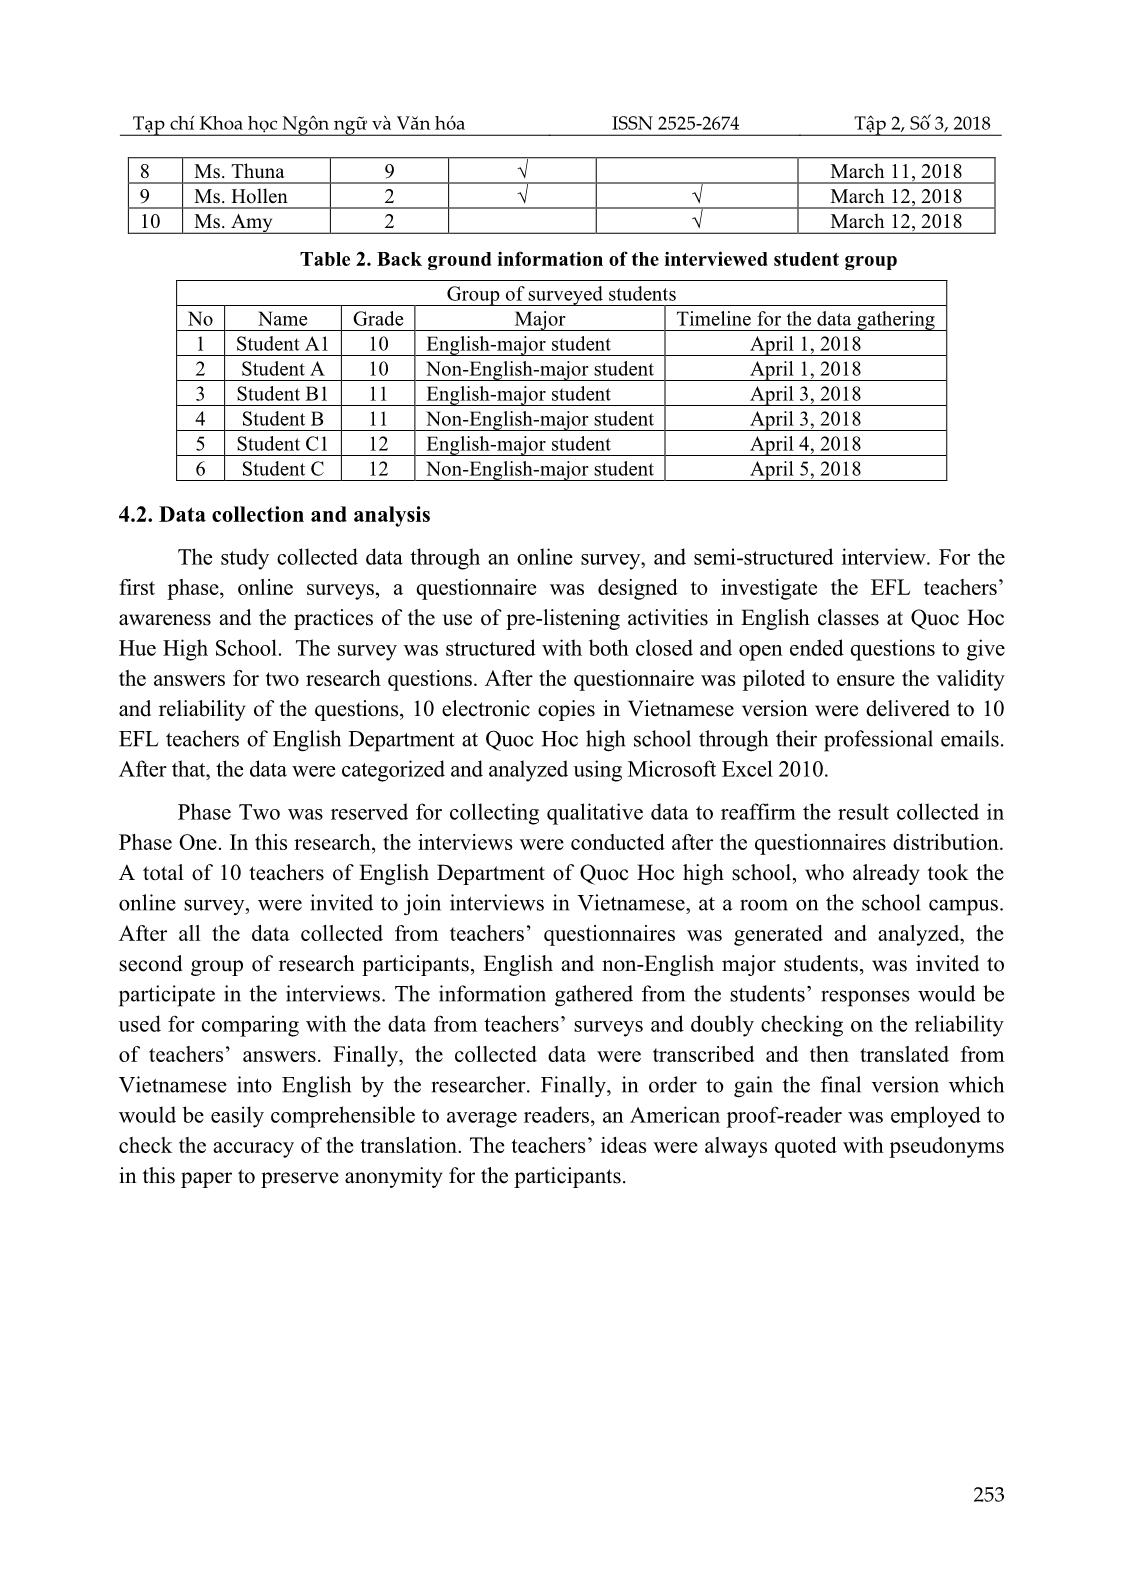 An investigation into efl teachers perceptions and practices of pre-Listening activities in english classes at Quoc Hoc Hue high school trang 5